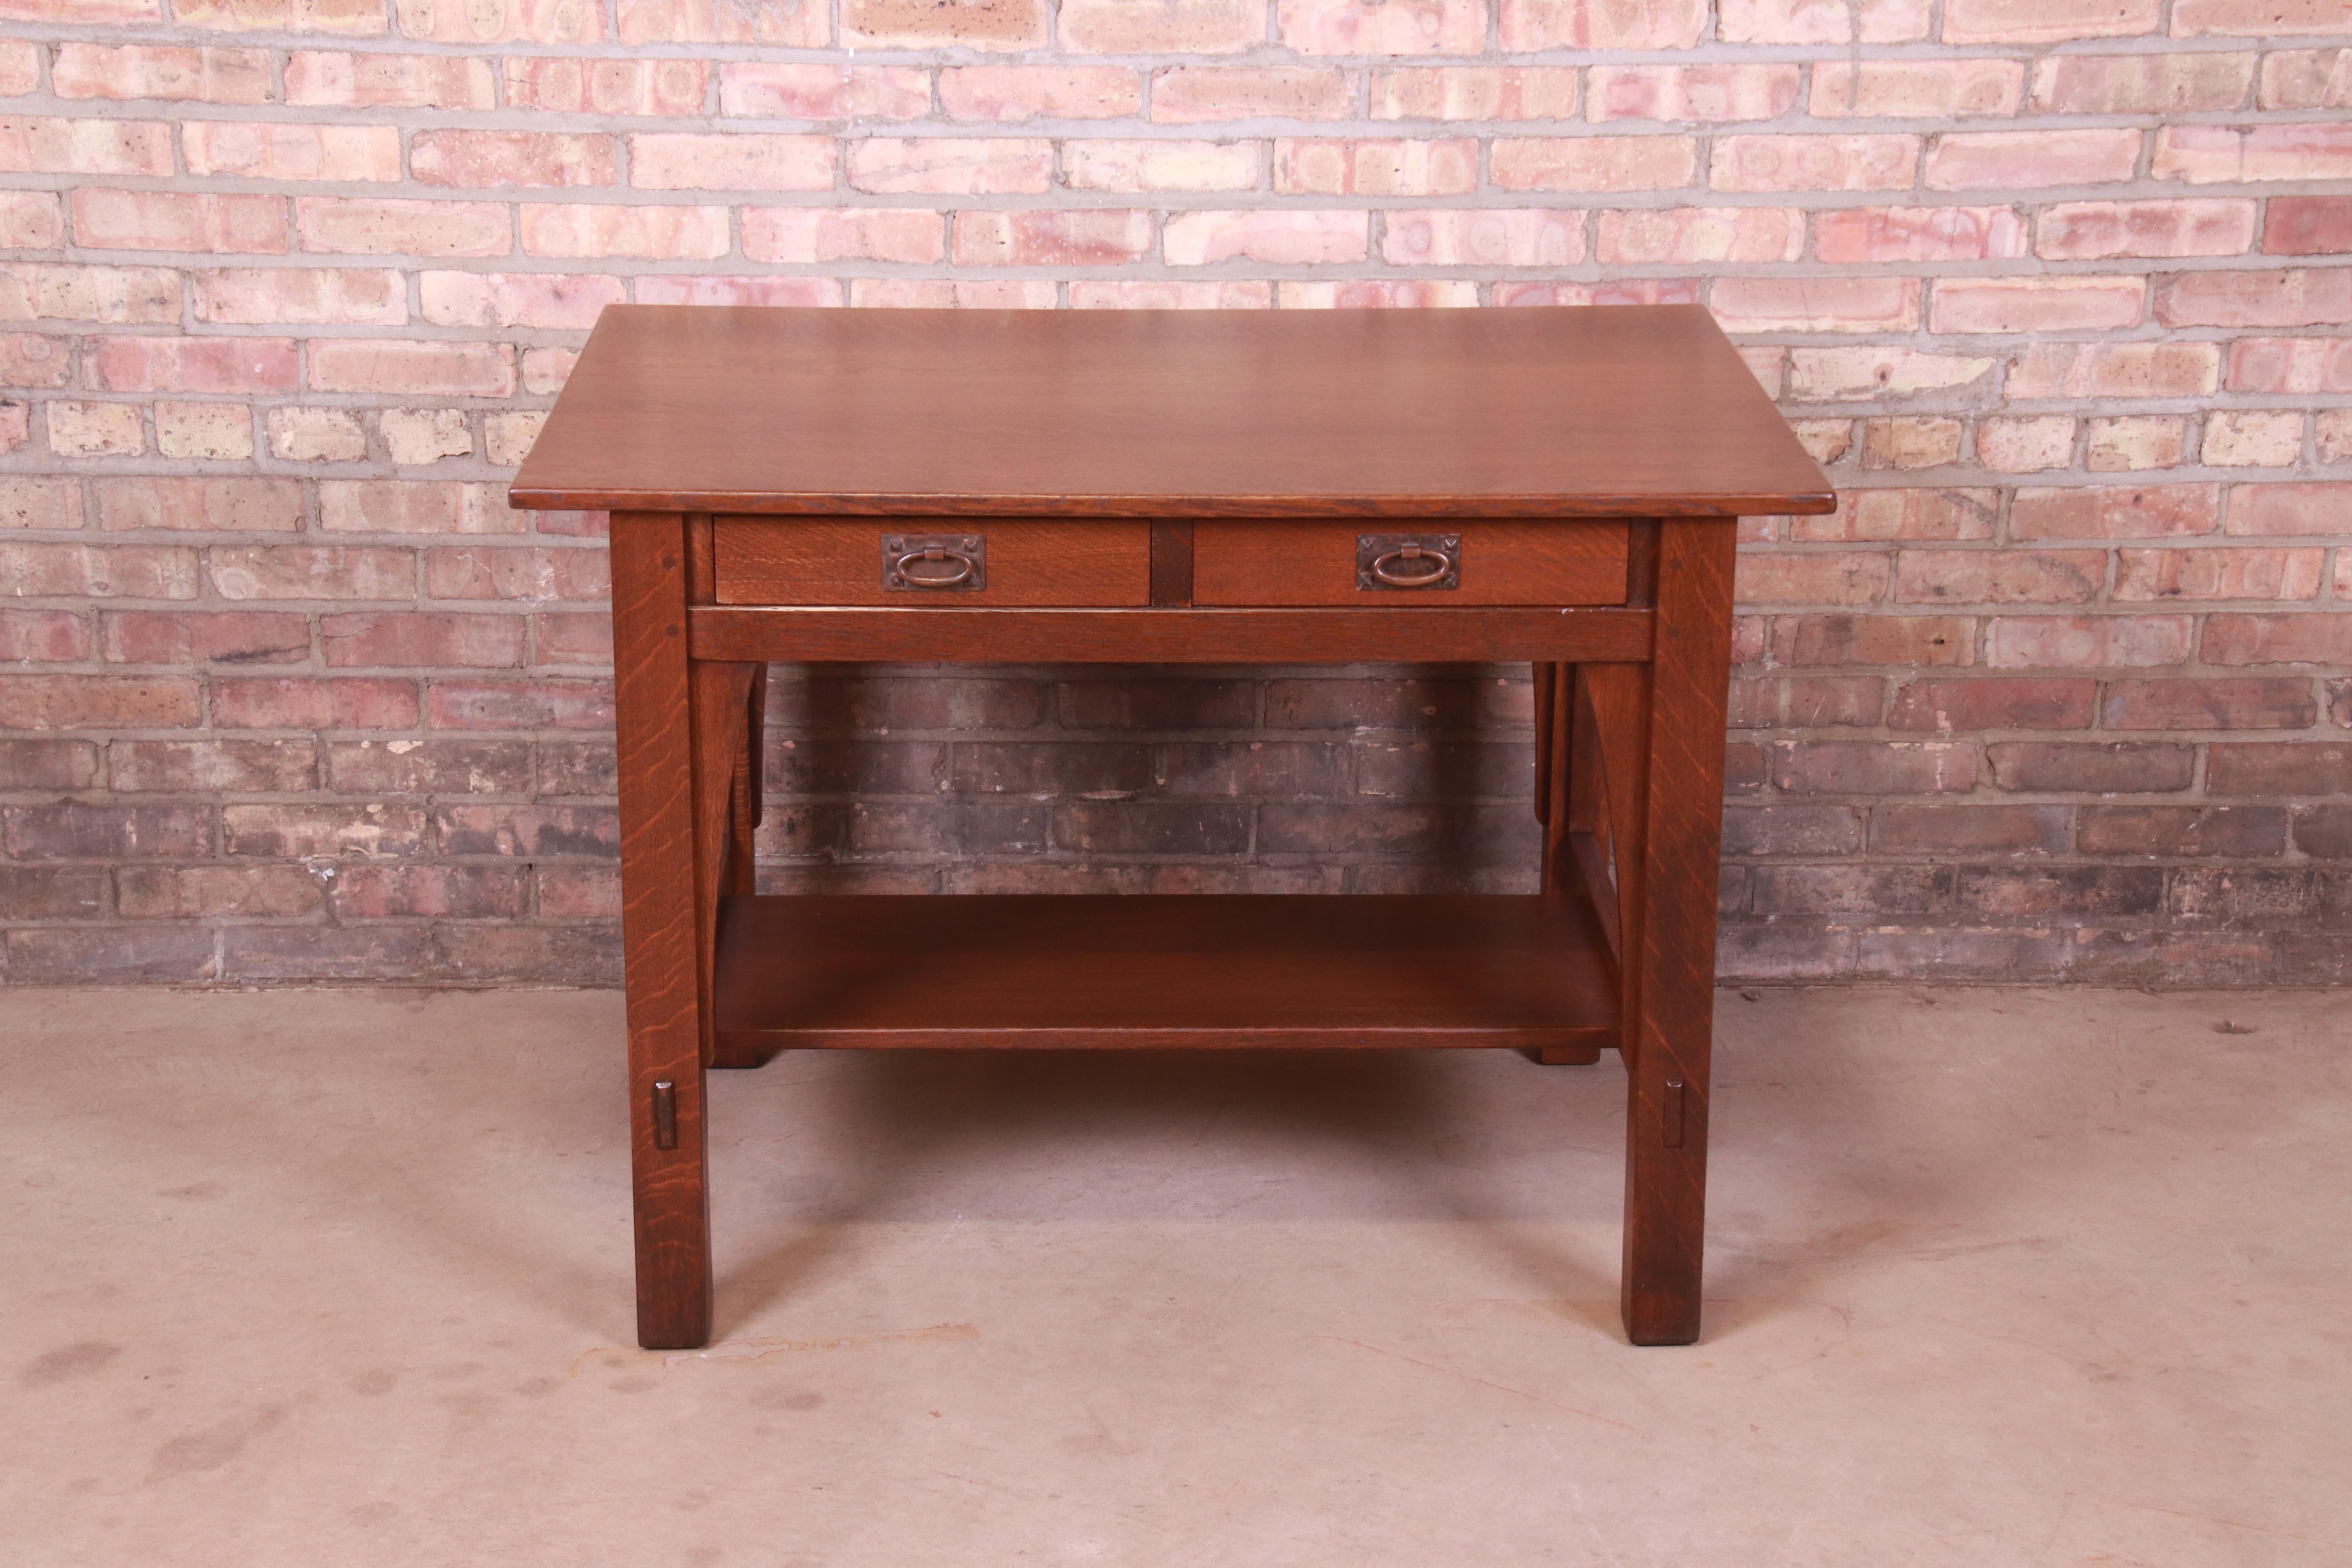 A rare and exceptional antique Mission oak Arts & Crafts writing desk or library table

By Gustav Stickley (original label present)

USA, Circa 1900

Solid quarter sawn oak, with original hammered copper hardware.

Measures: 41.38